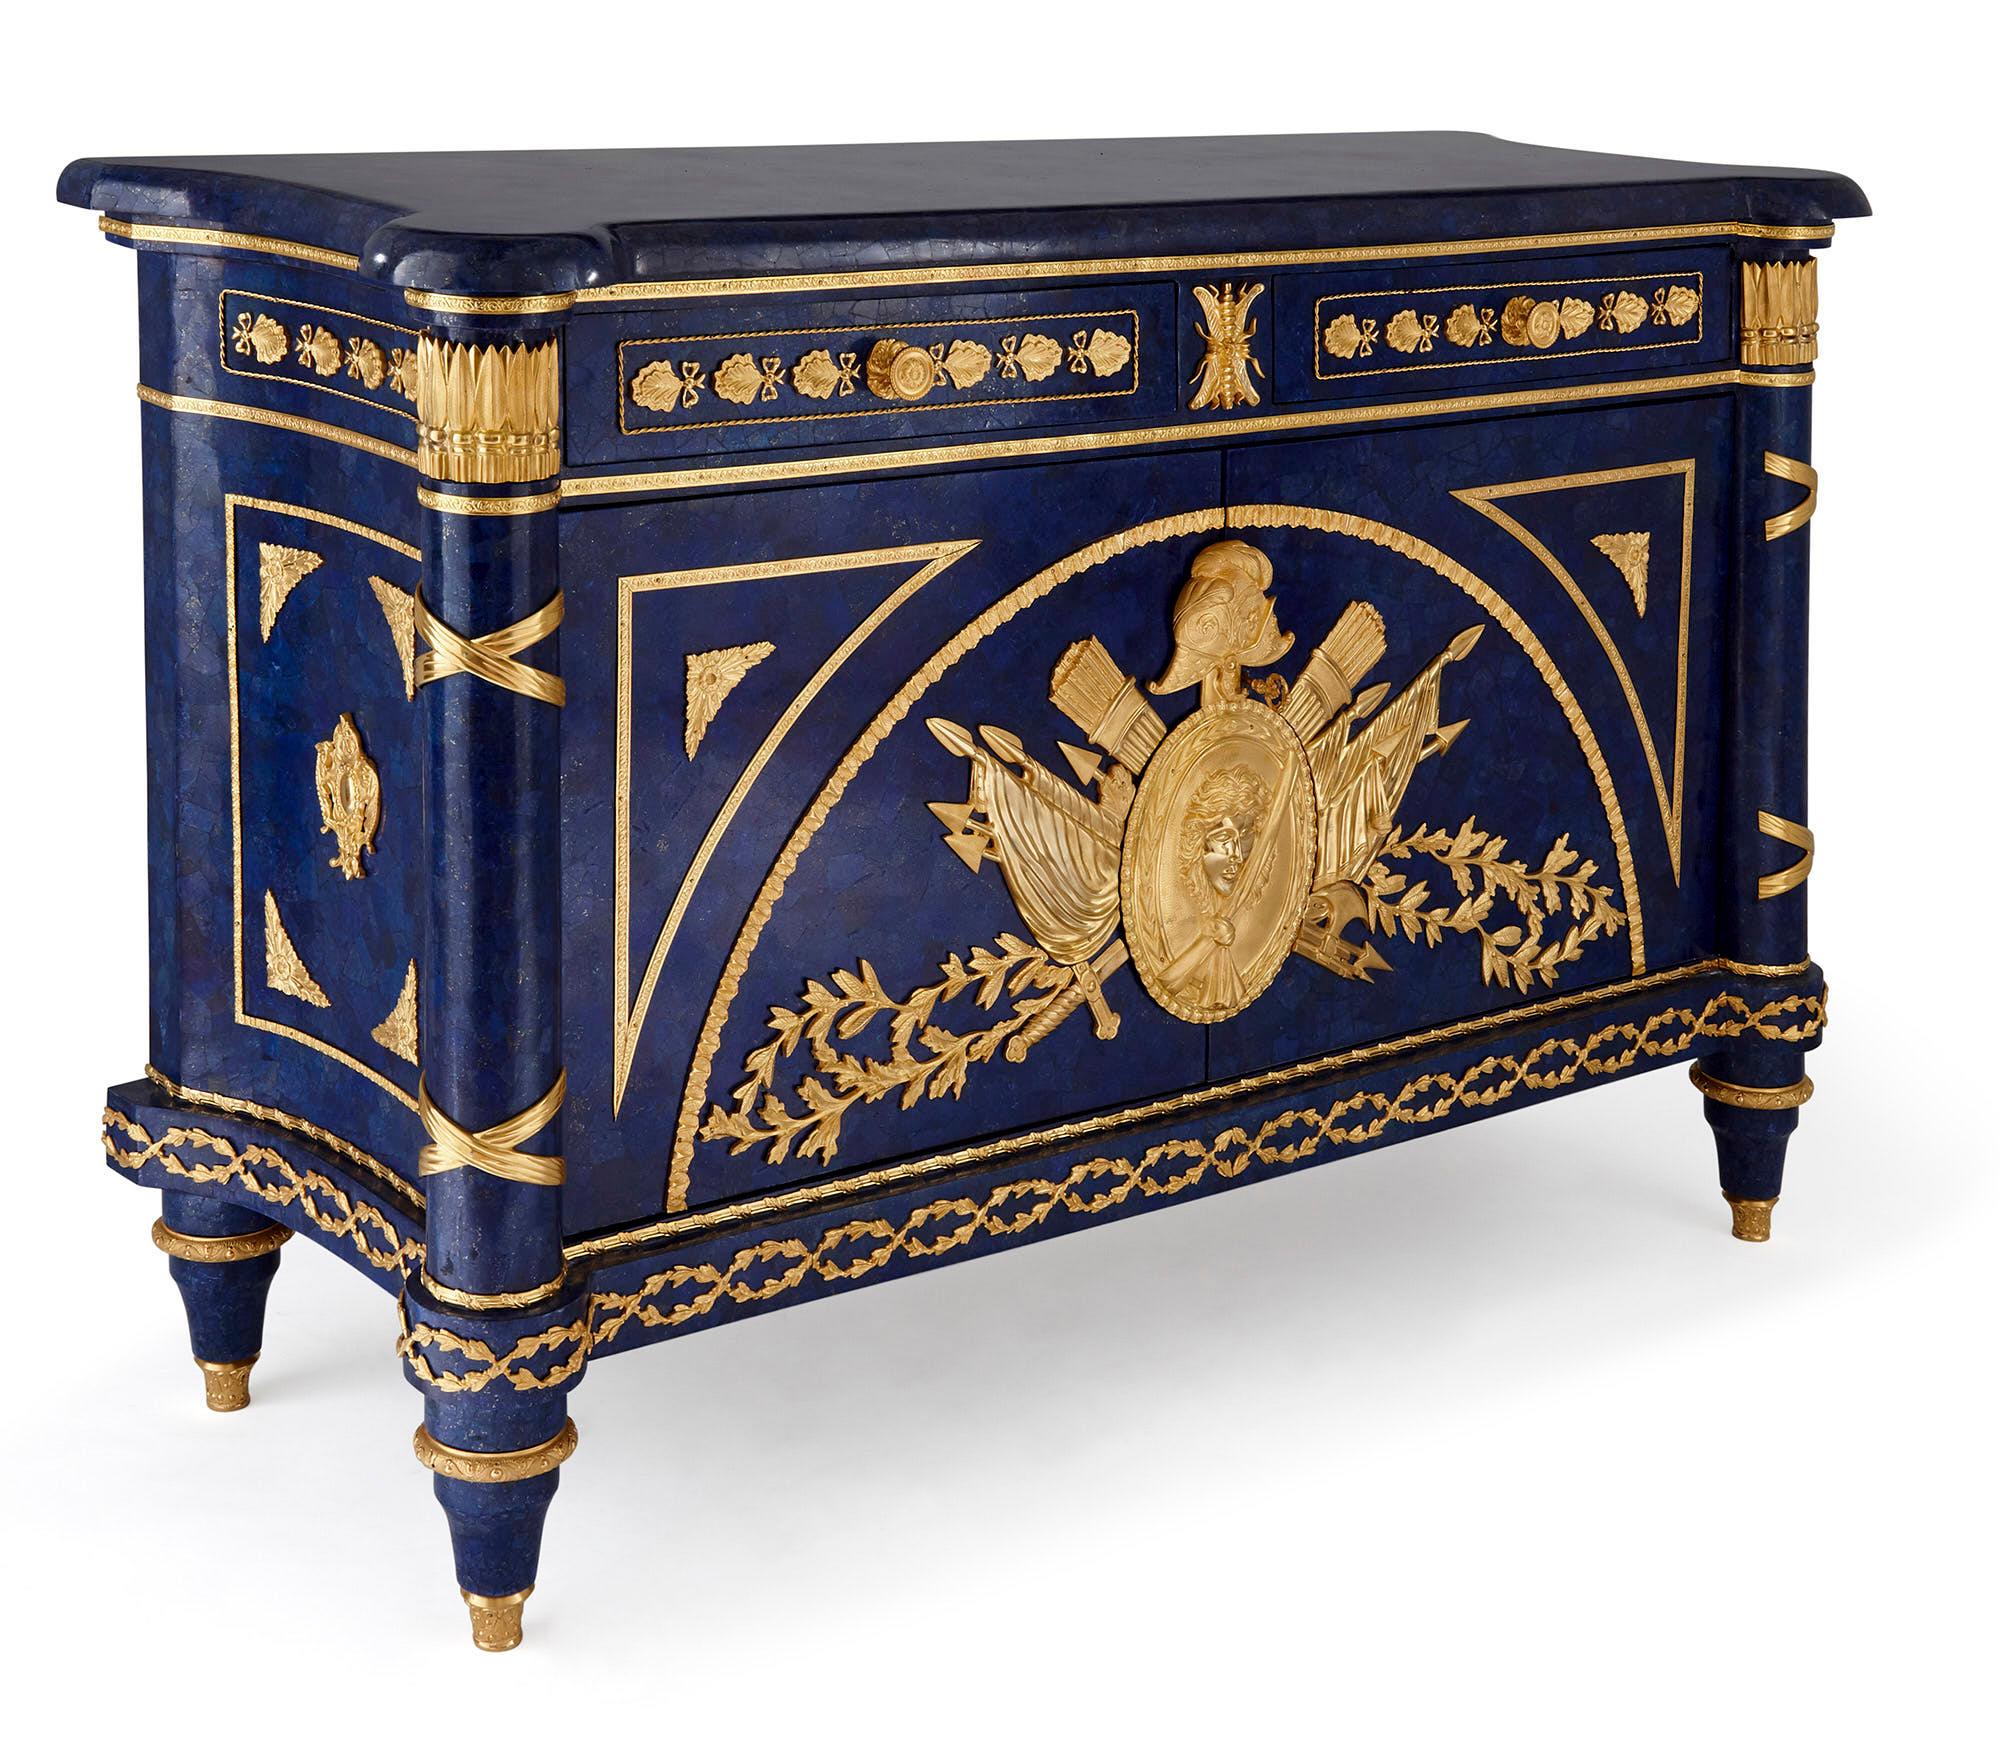 French gilt metal mounted lapis commode in the Empire style
French, 20th century
Size: Height 94cm, width 147cm, depth 55cm

Crafted in the Empire style, this beautiful commode is wrought from lapis and gilt metal, in a timeless combination of rich